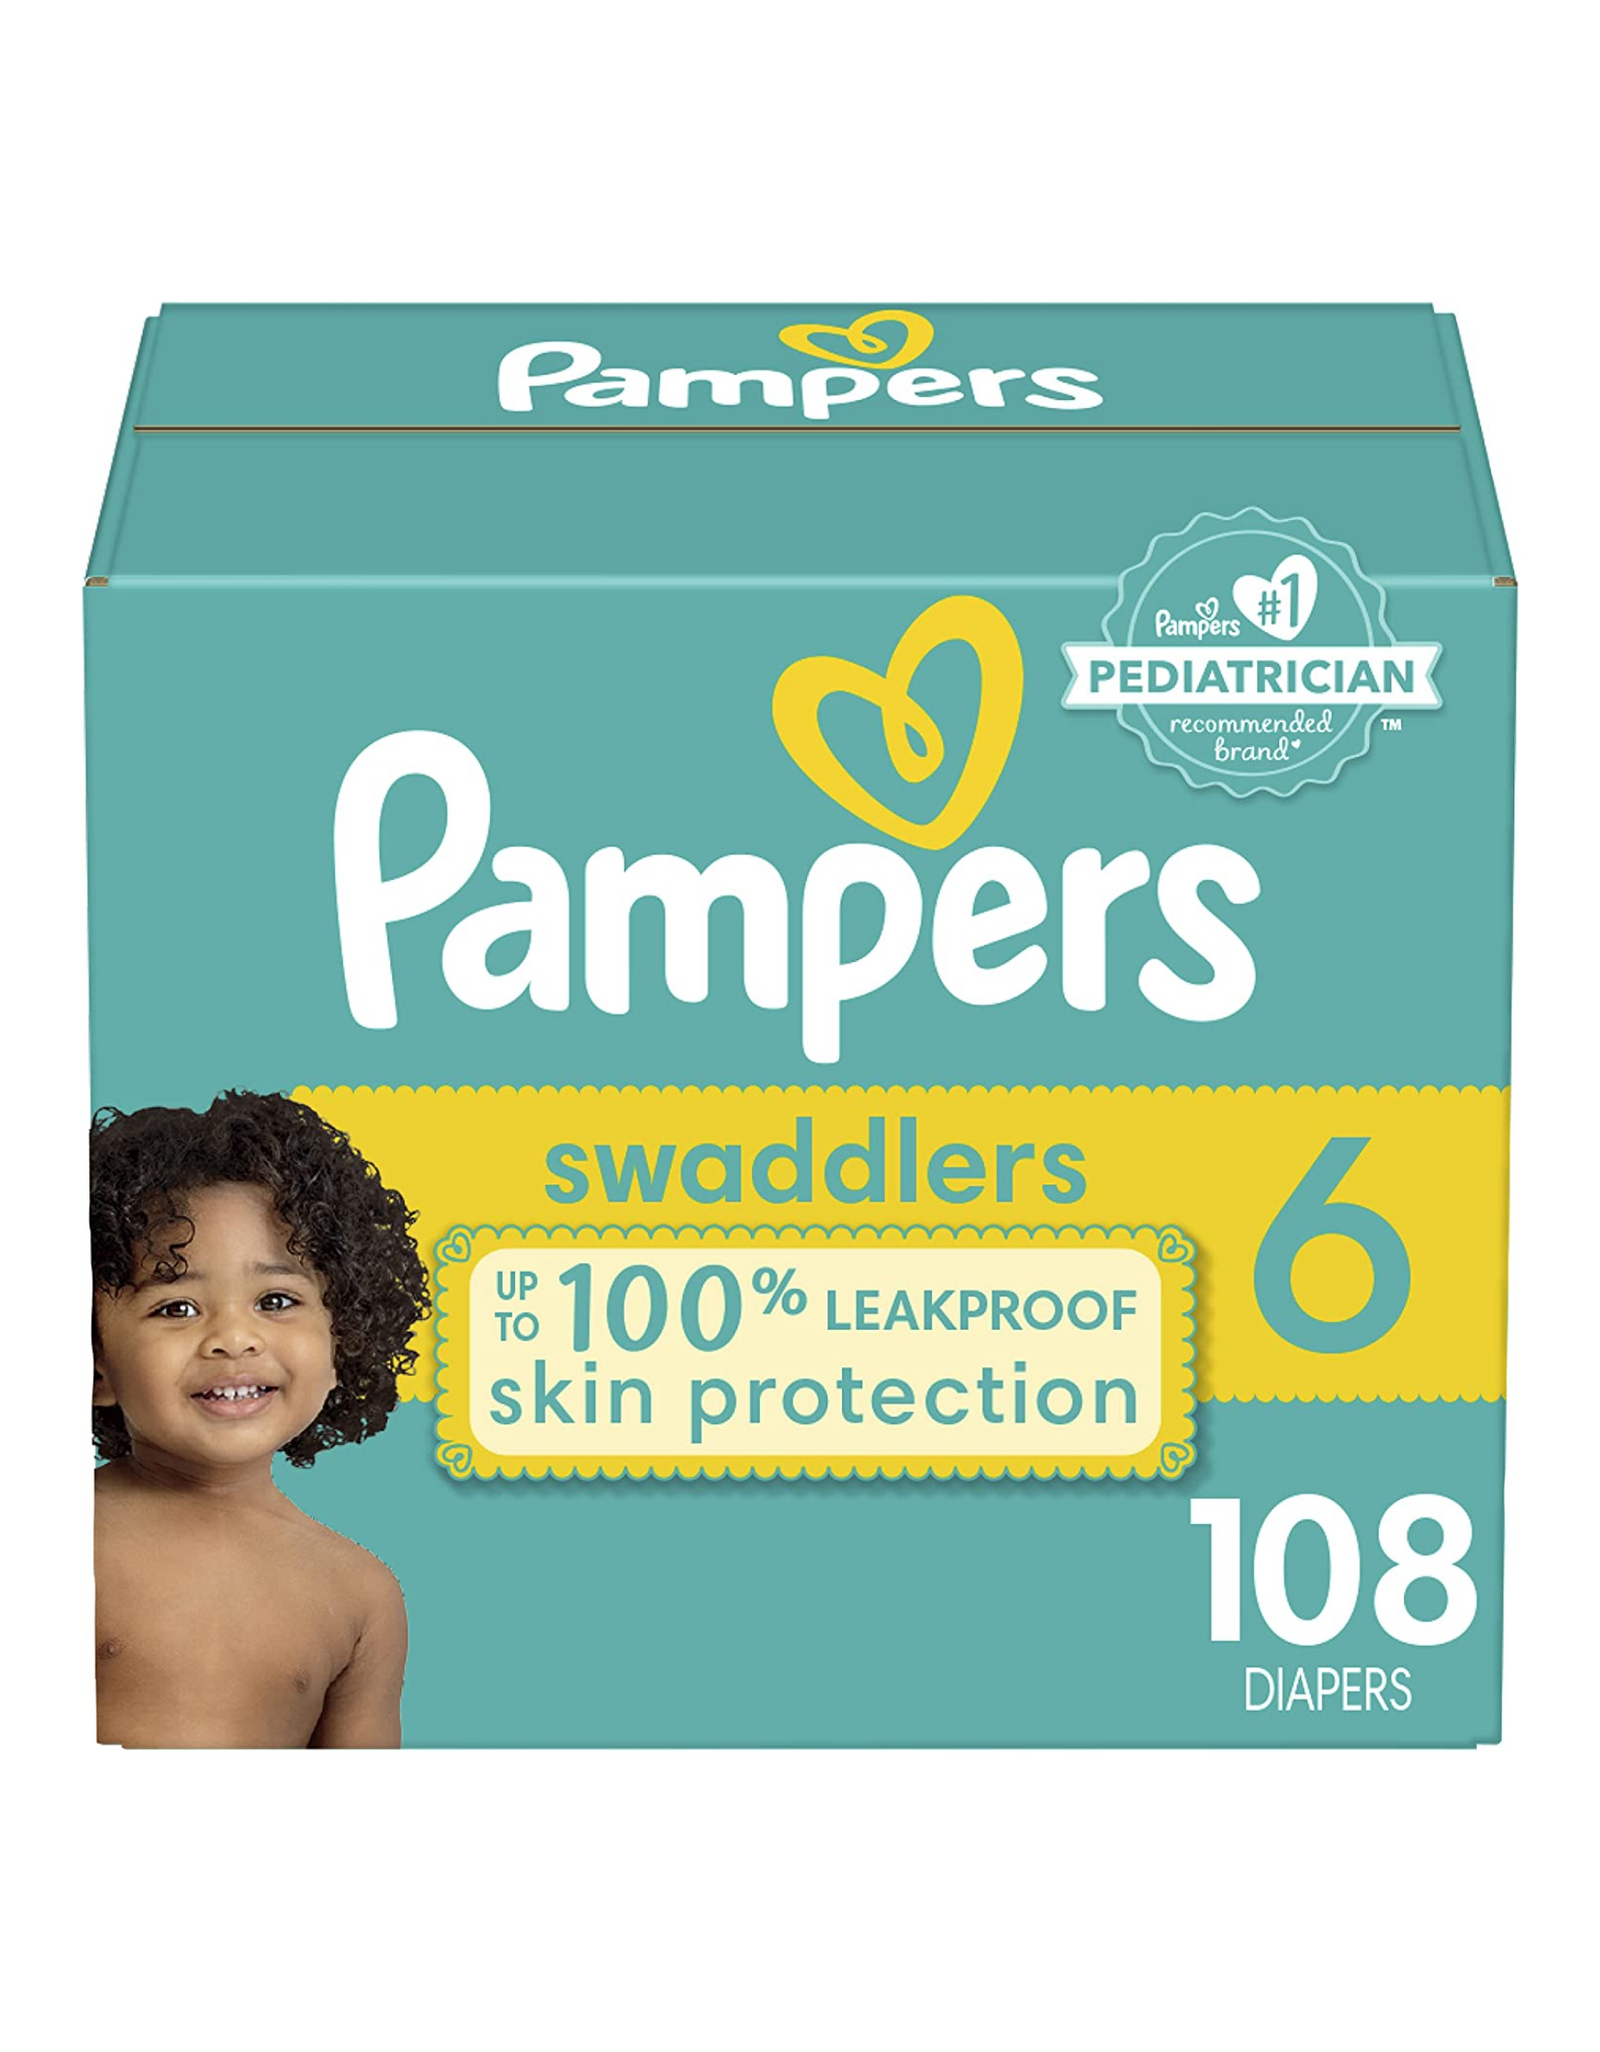 Diapers Size 6, 108 Count - Pampers Swaddlers Disposable Baby Diapers (Packaging May Vary)